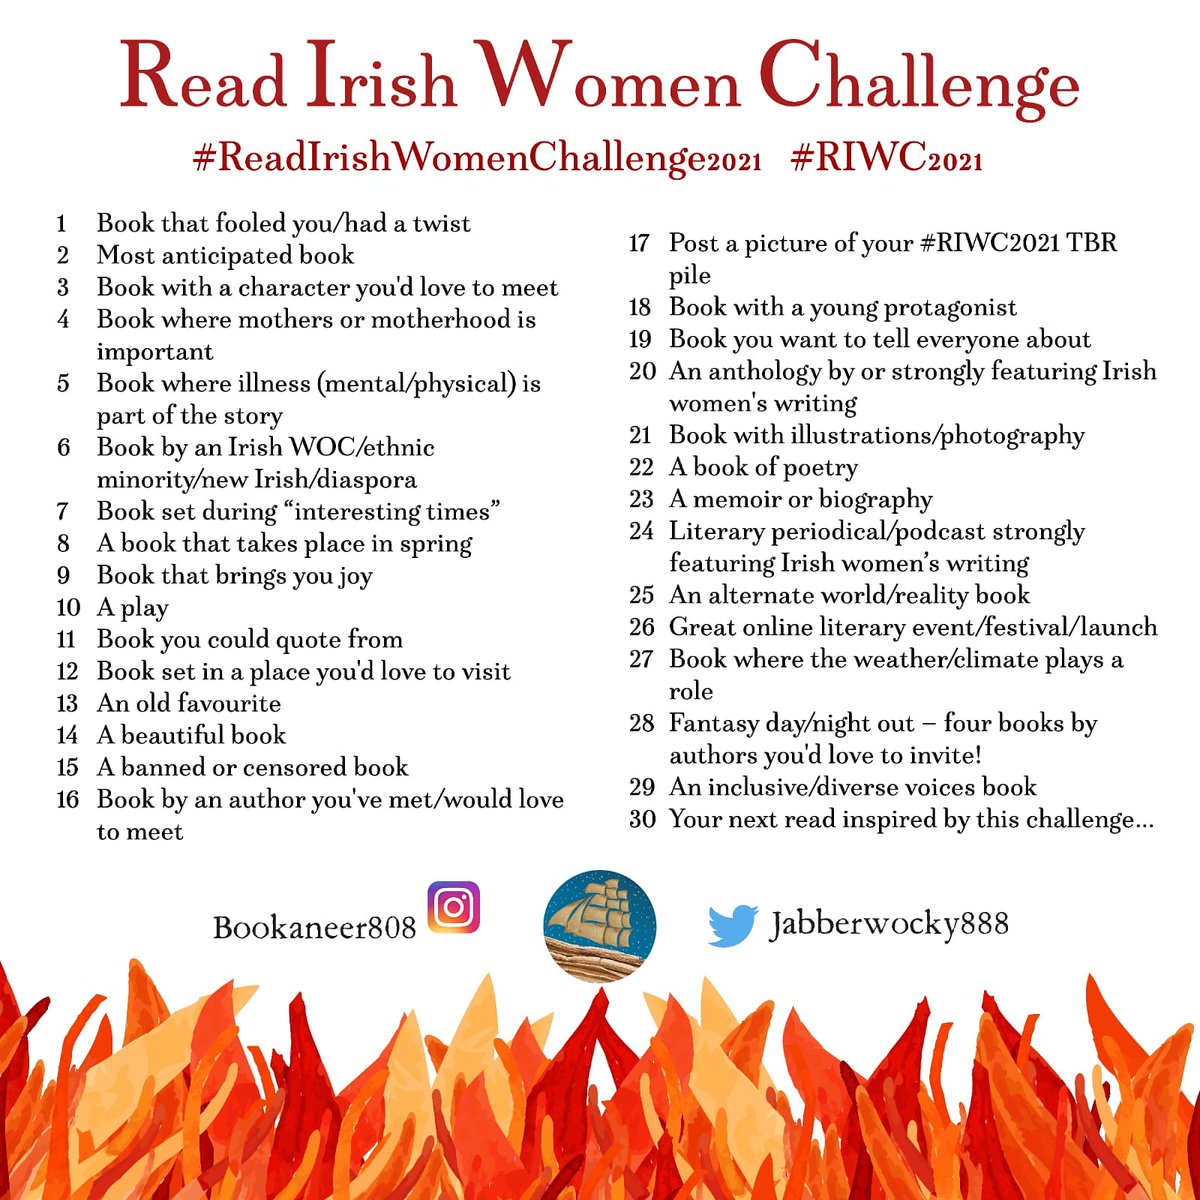 Day 23 of the  #ReadIrishWomenChallenge2021: a memoir / biographyNotes to Self by  @emiliepine.Essays on birth and death, the grief of infertility, caring for her alcoholic father, taboos around female bodies and female pain, sexual violence and violence against the self.